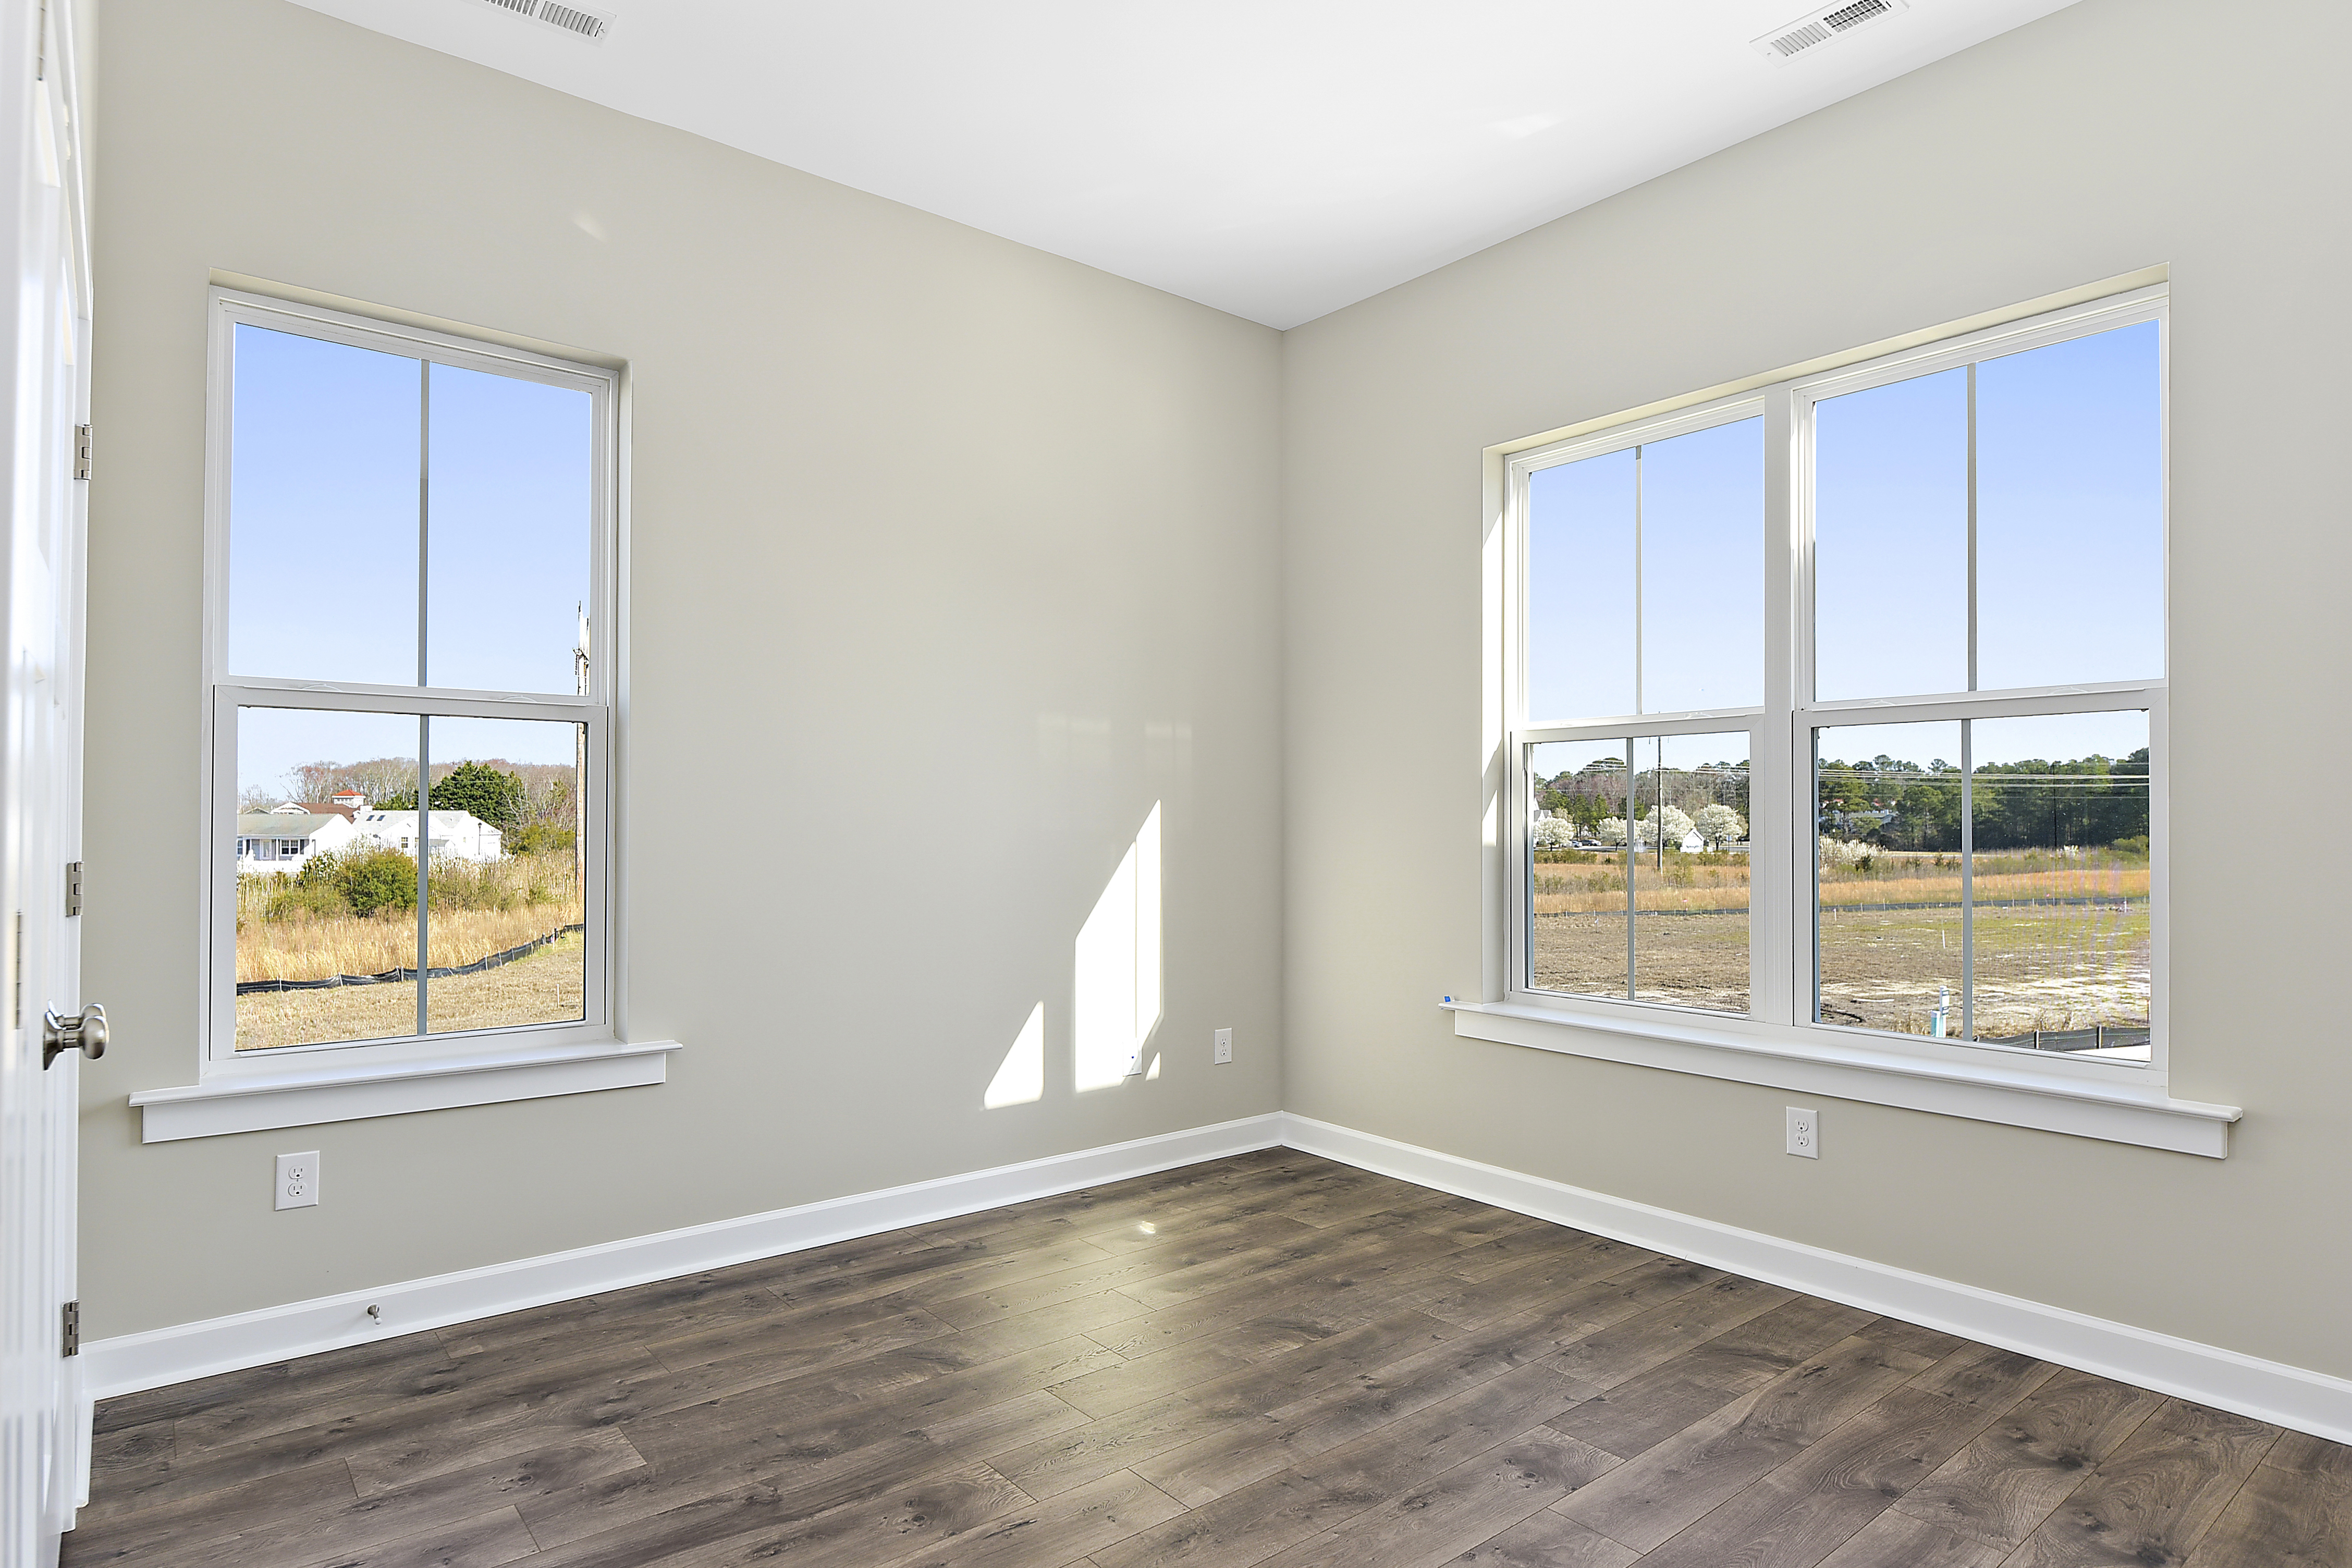 Empty bedroom with numerous windows and wooden floors